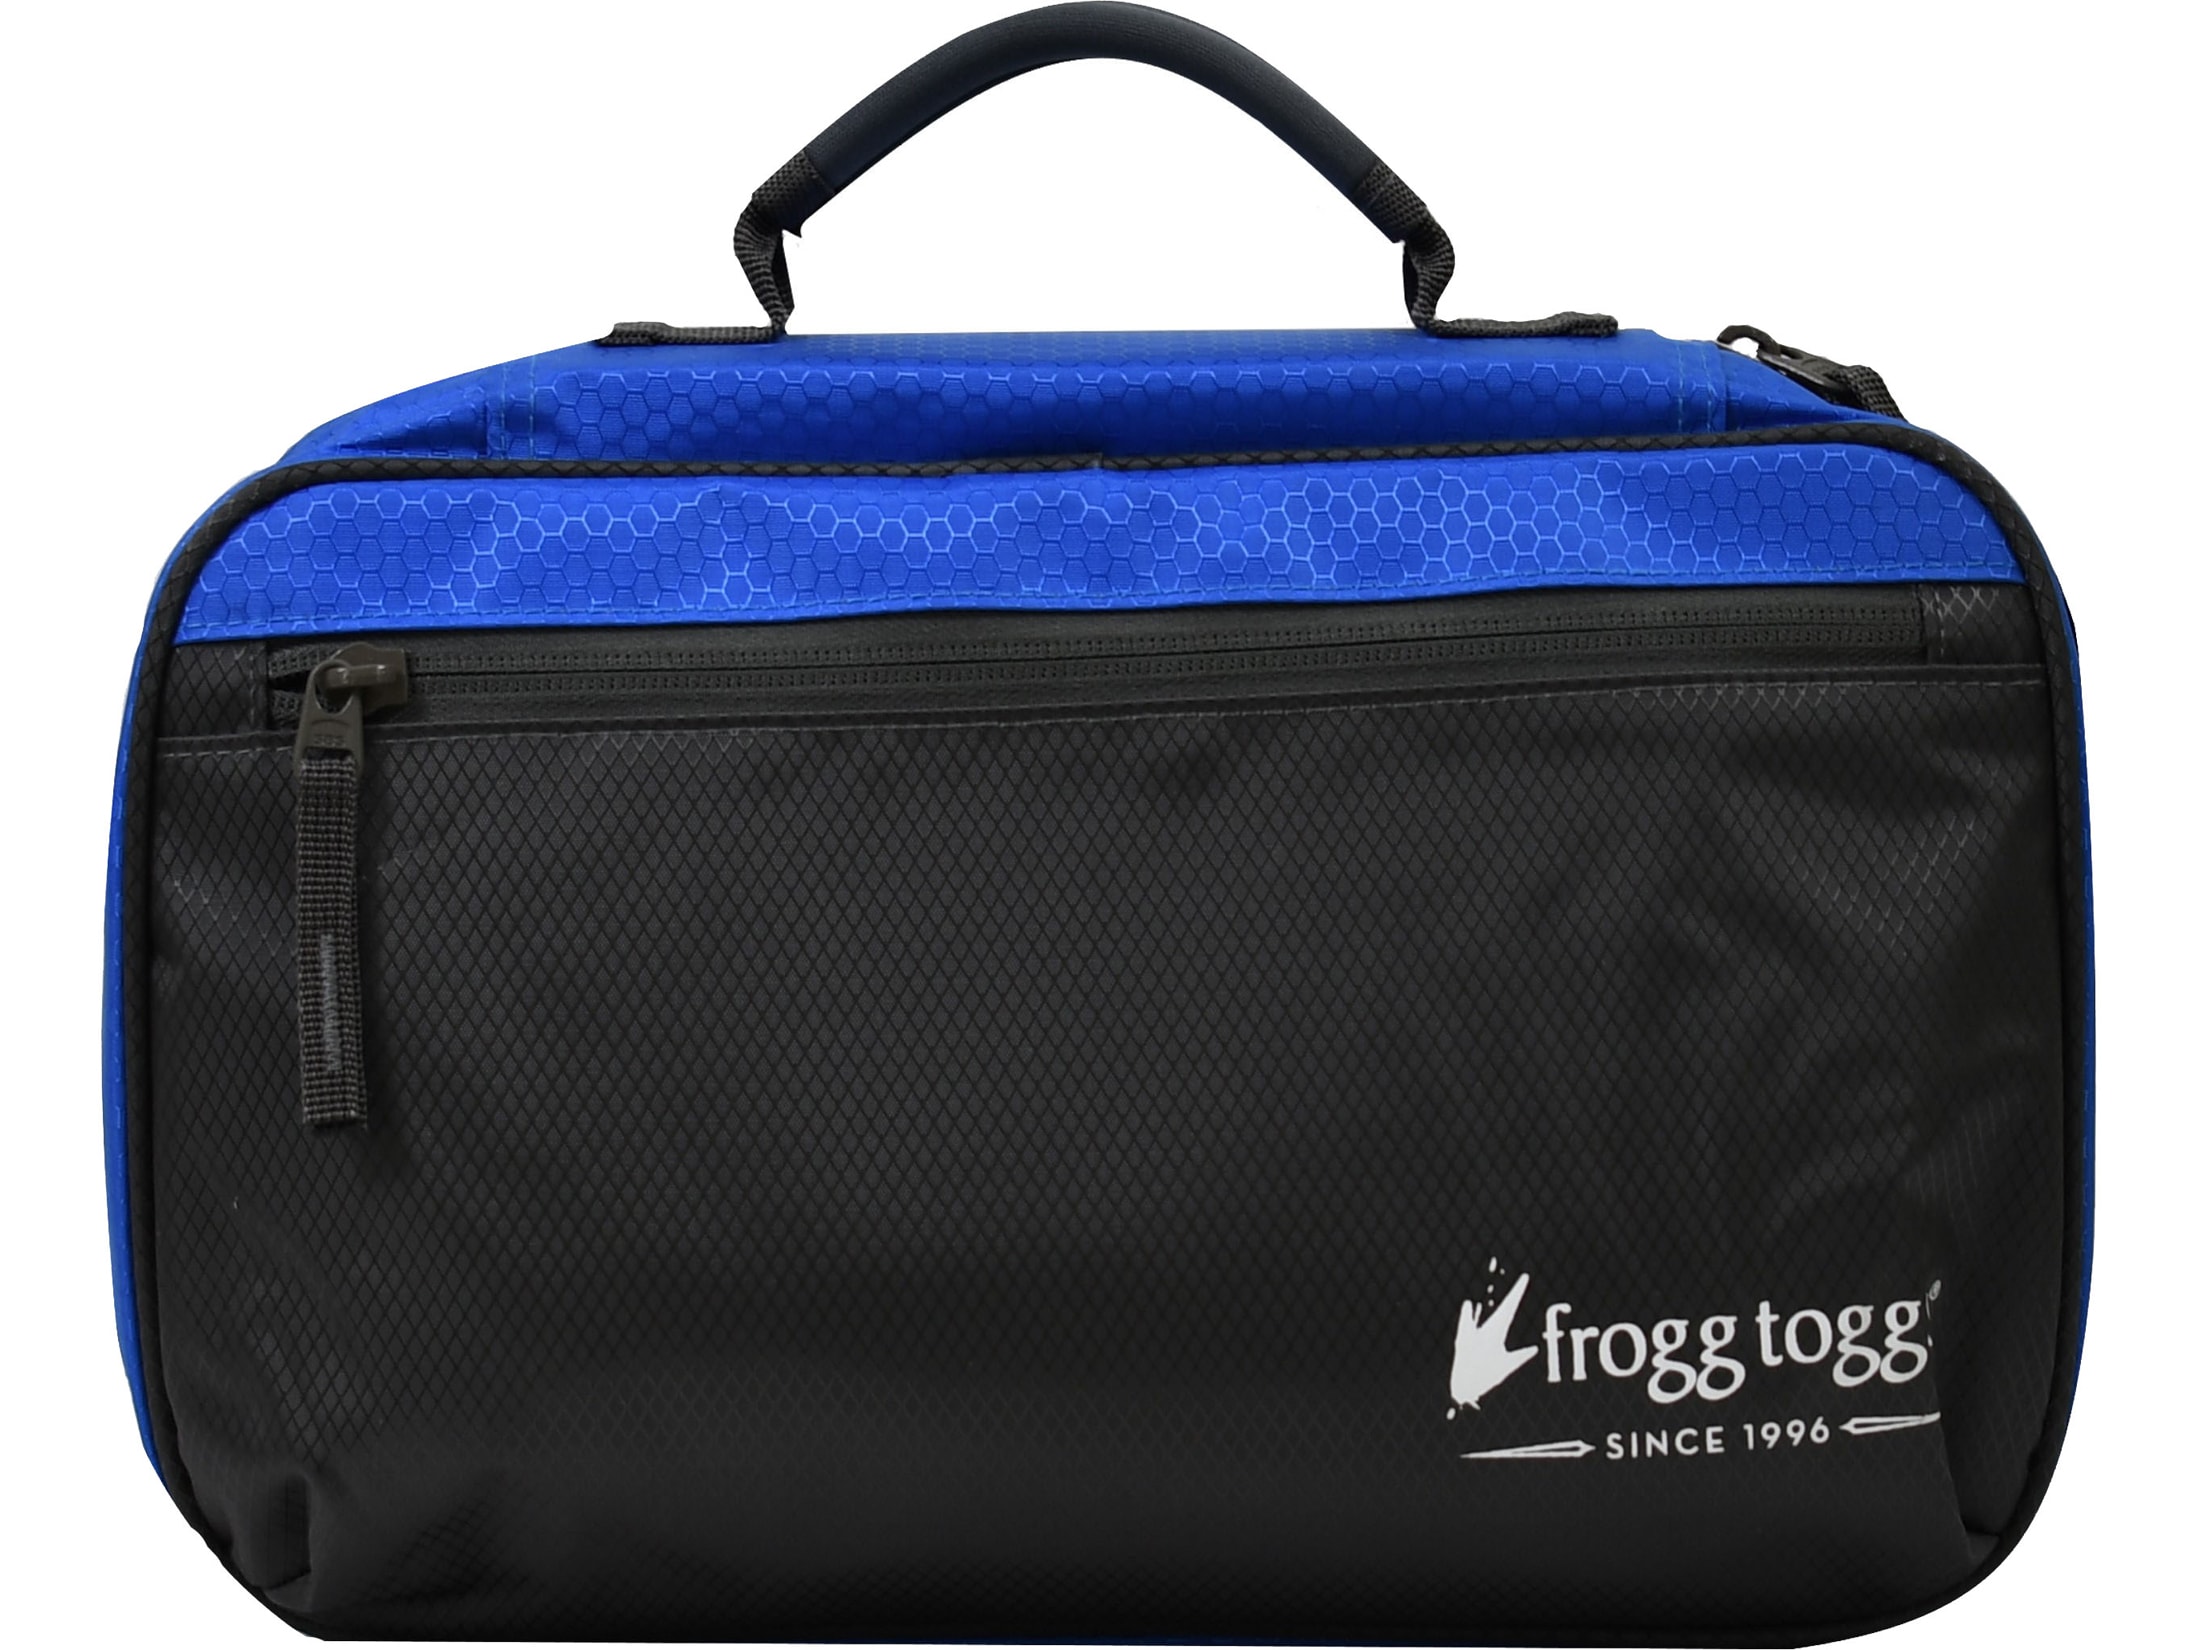 FROGG TOGGS Fishing Tote, Secures Organizes and Protects Tackle